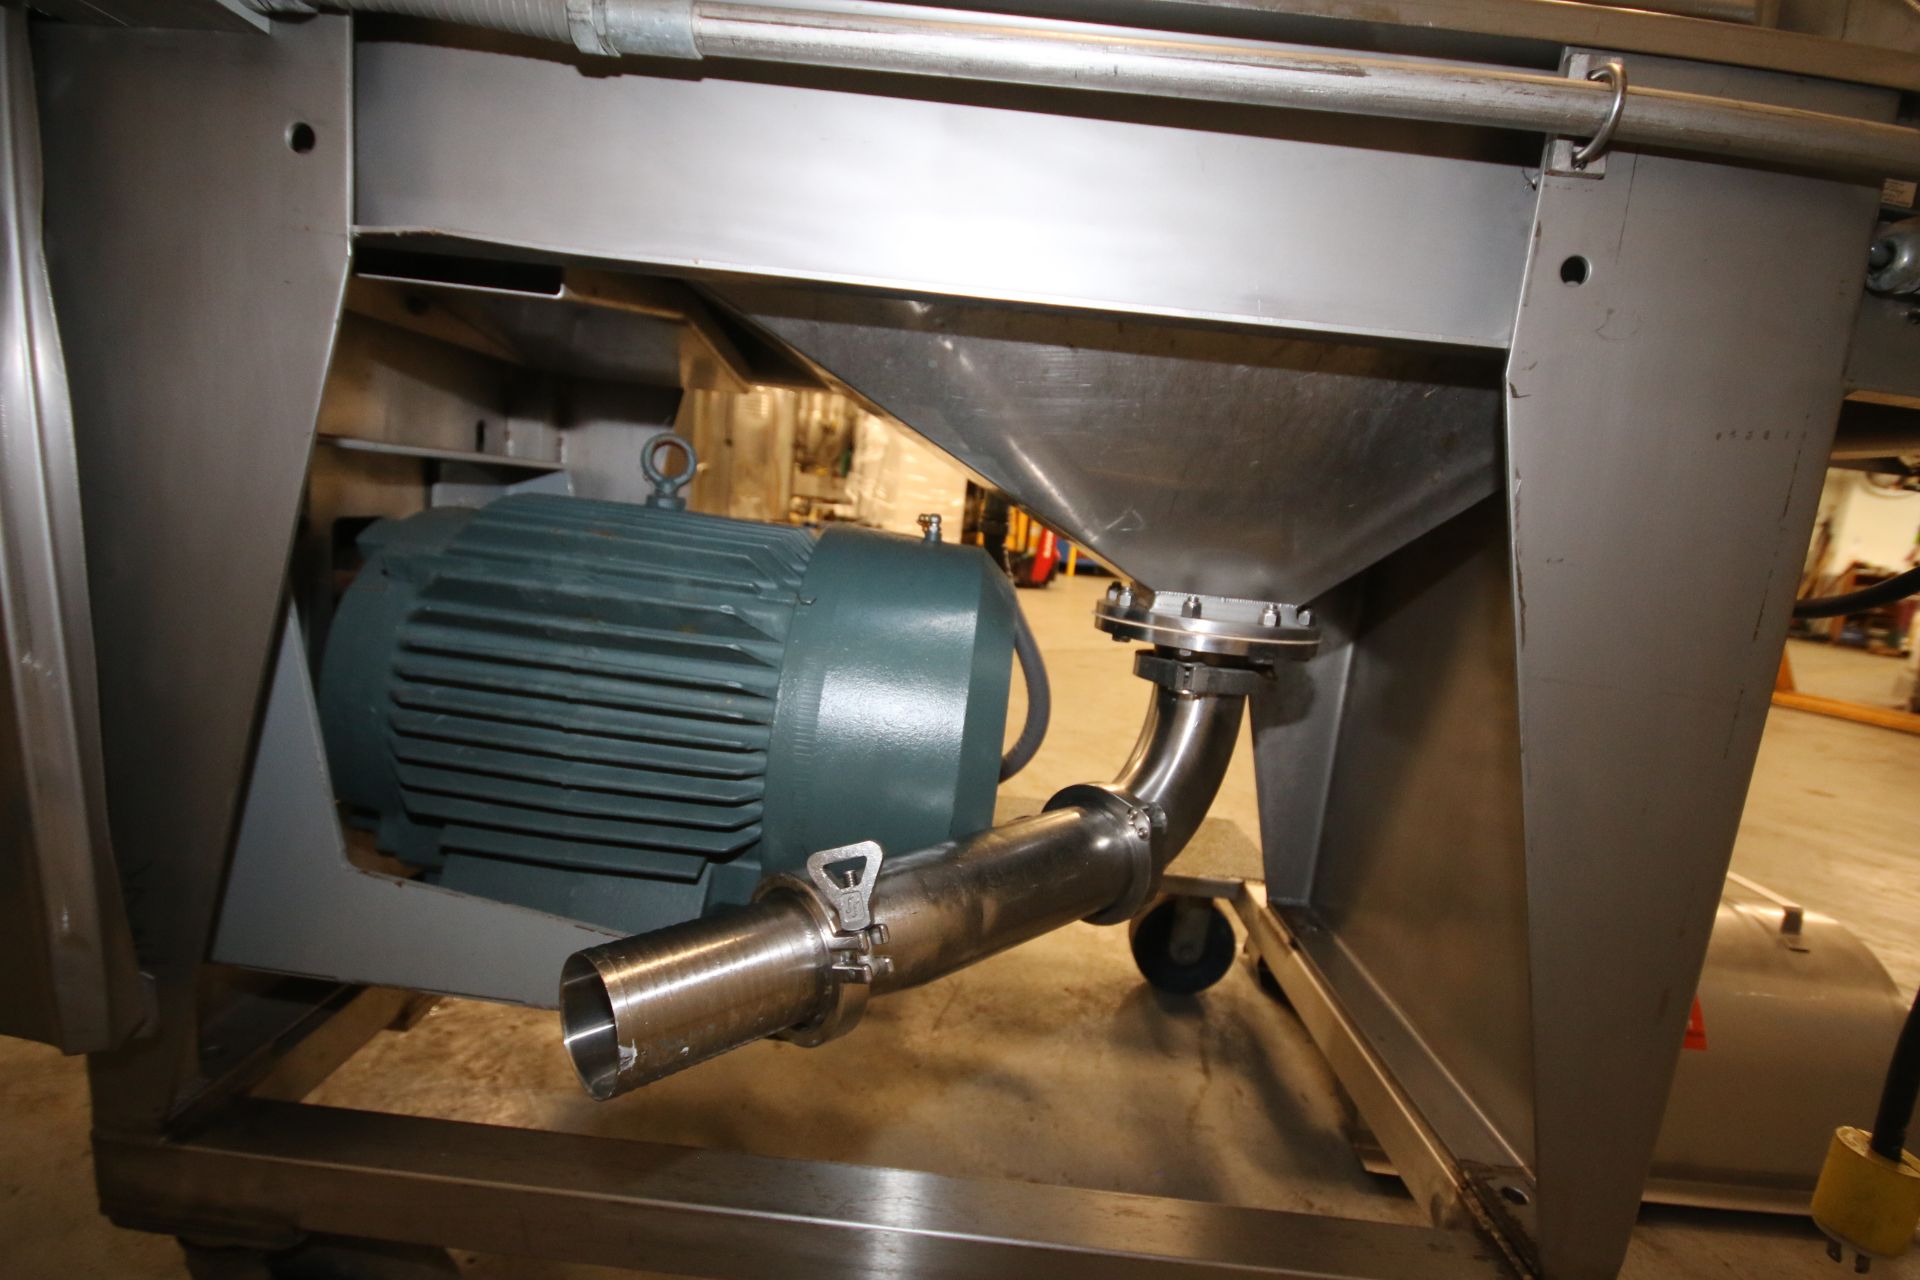 Brown S/S Screw Finisher / Extractor, Model 3900, S/N 3902 AAAA, 10 hp / 1160 rpm, with AB Starter - Image 7 of 11